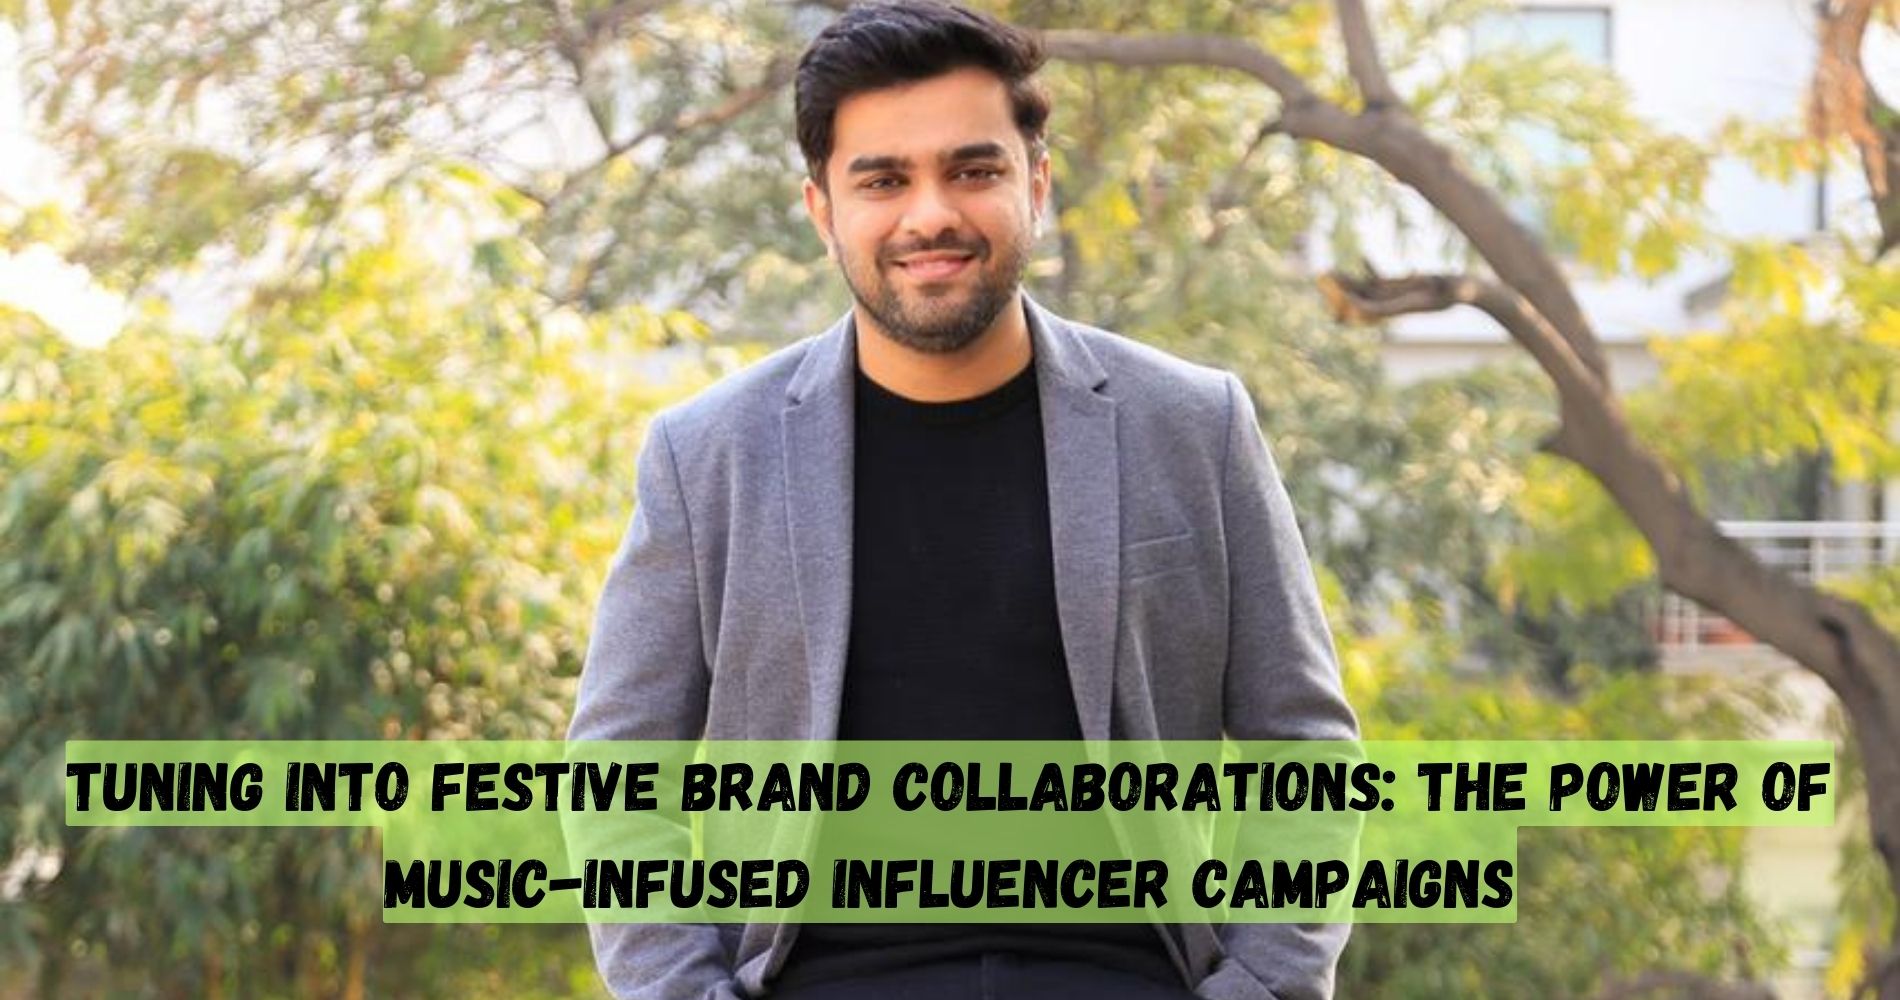 Tuning Into Festive Brand Collaborations: The Power of Music-Infused Influencer